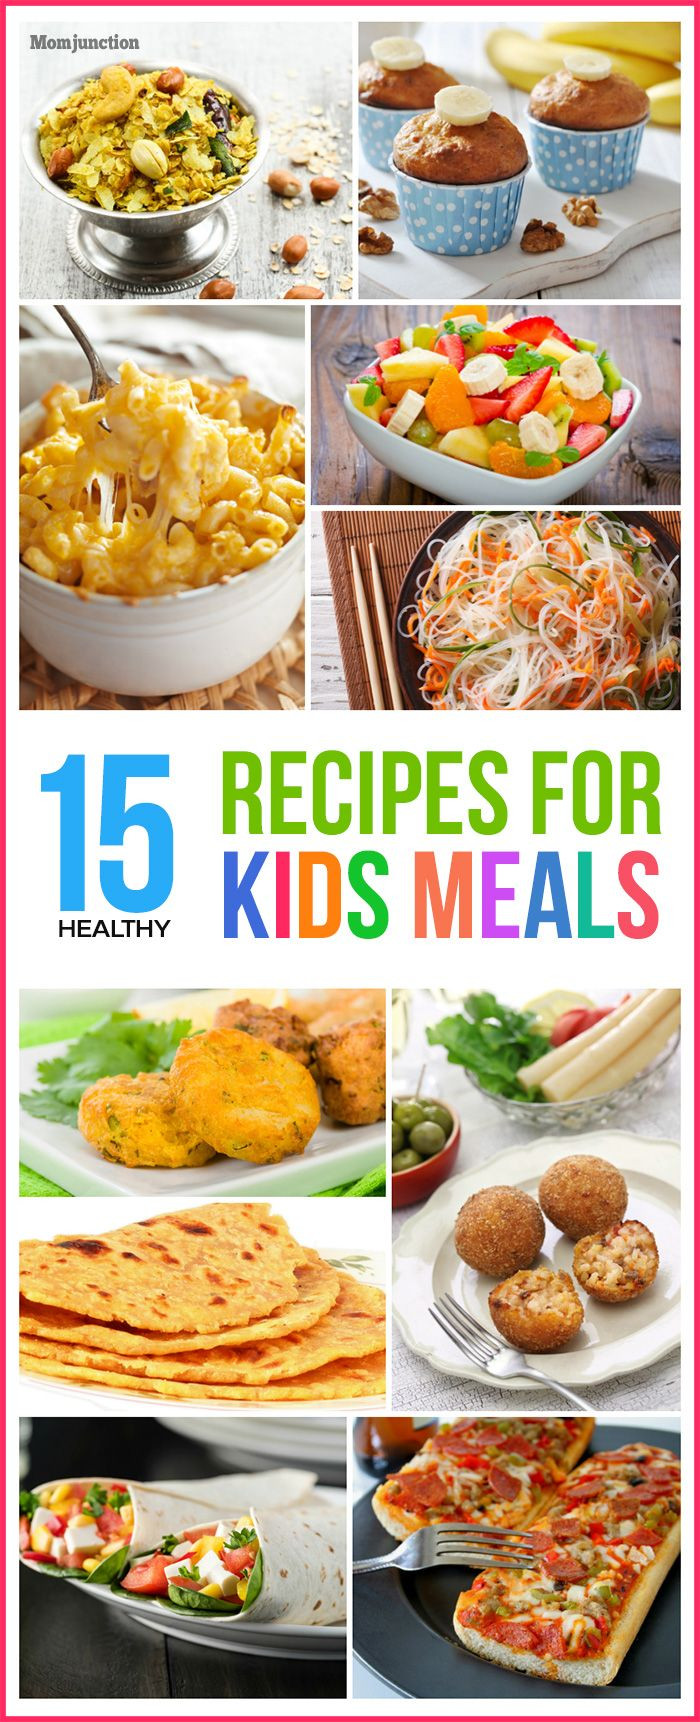 Kid Friendly Healthy Recipes
 Top 15 Healthy Recipes For Kids Meals